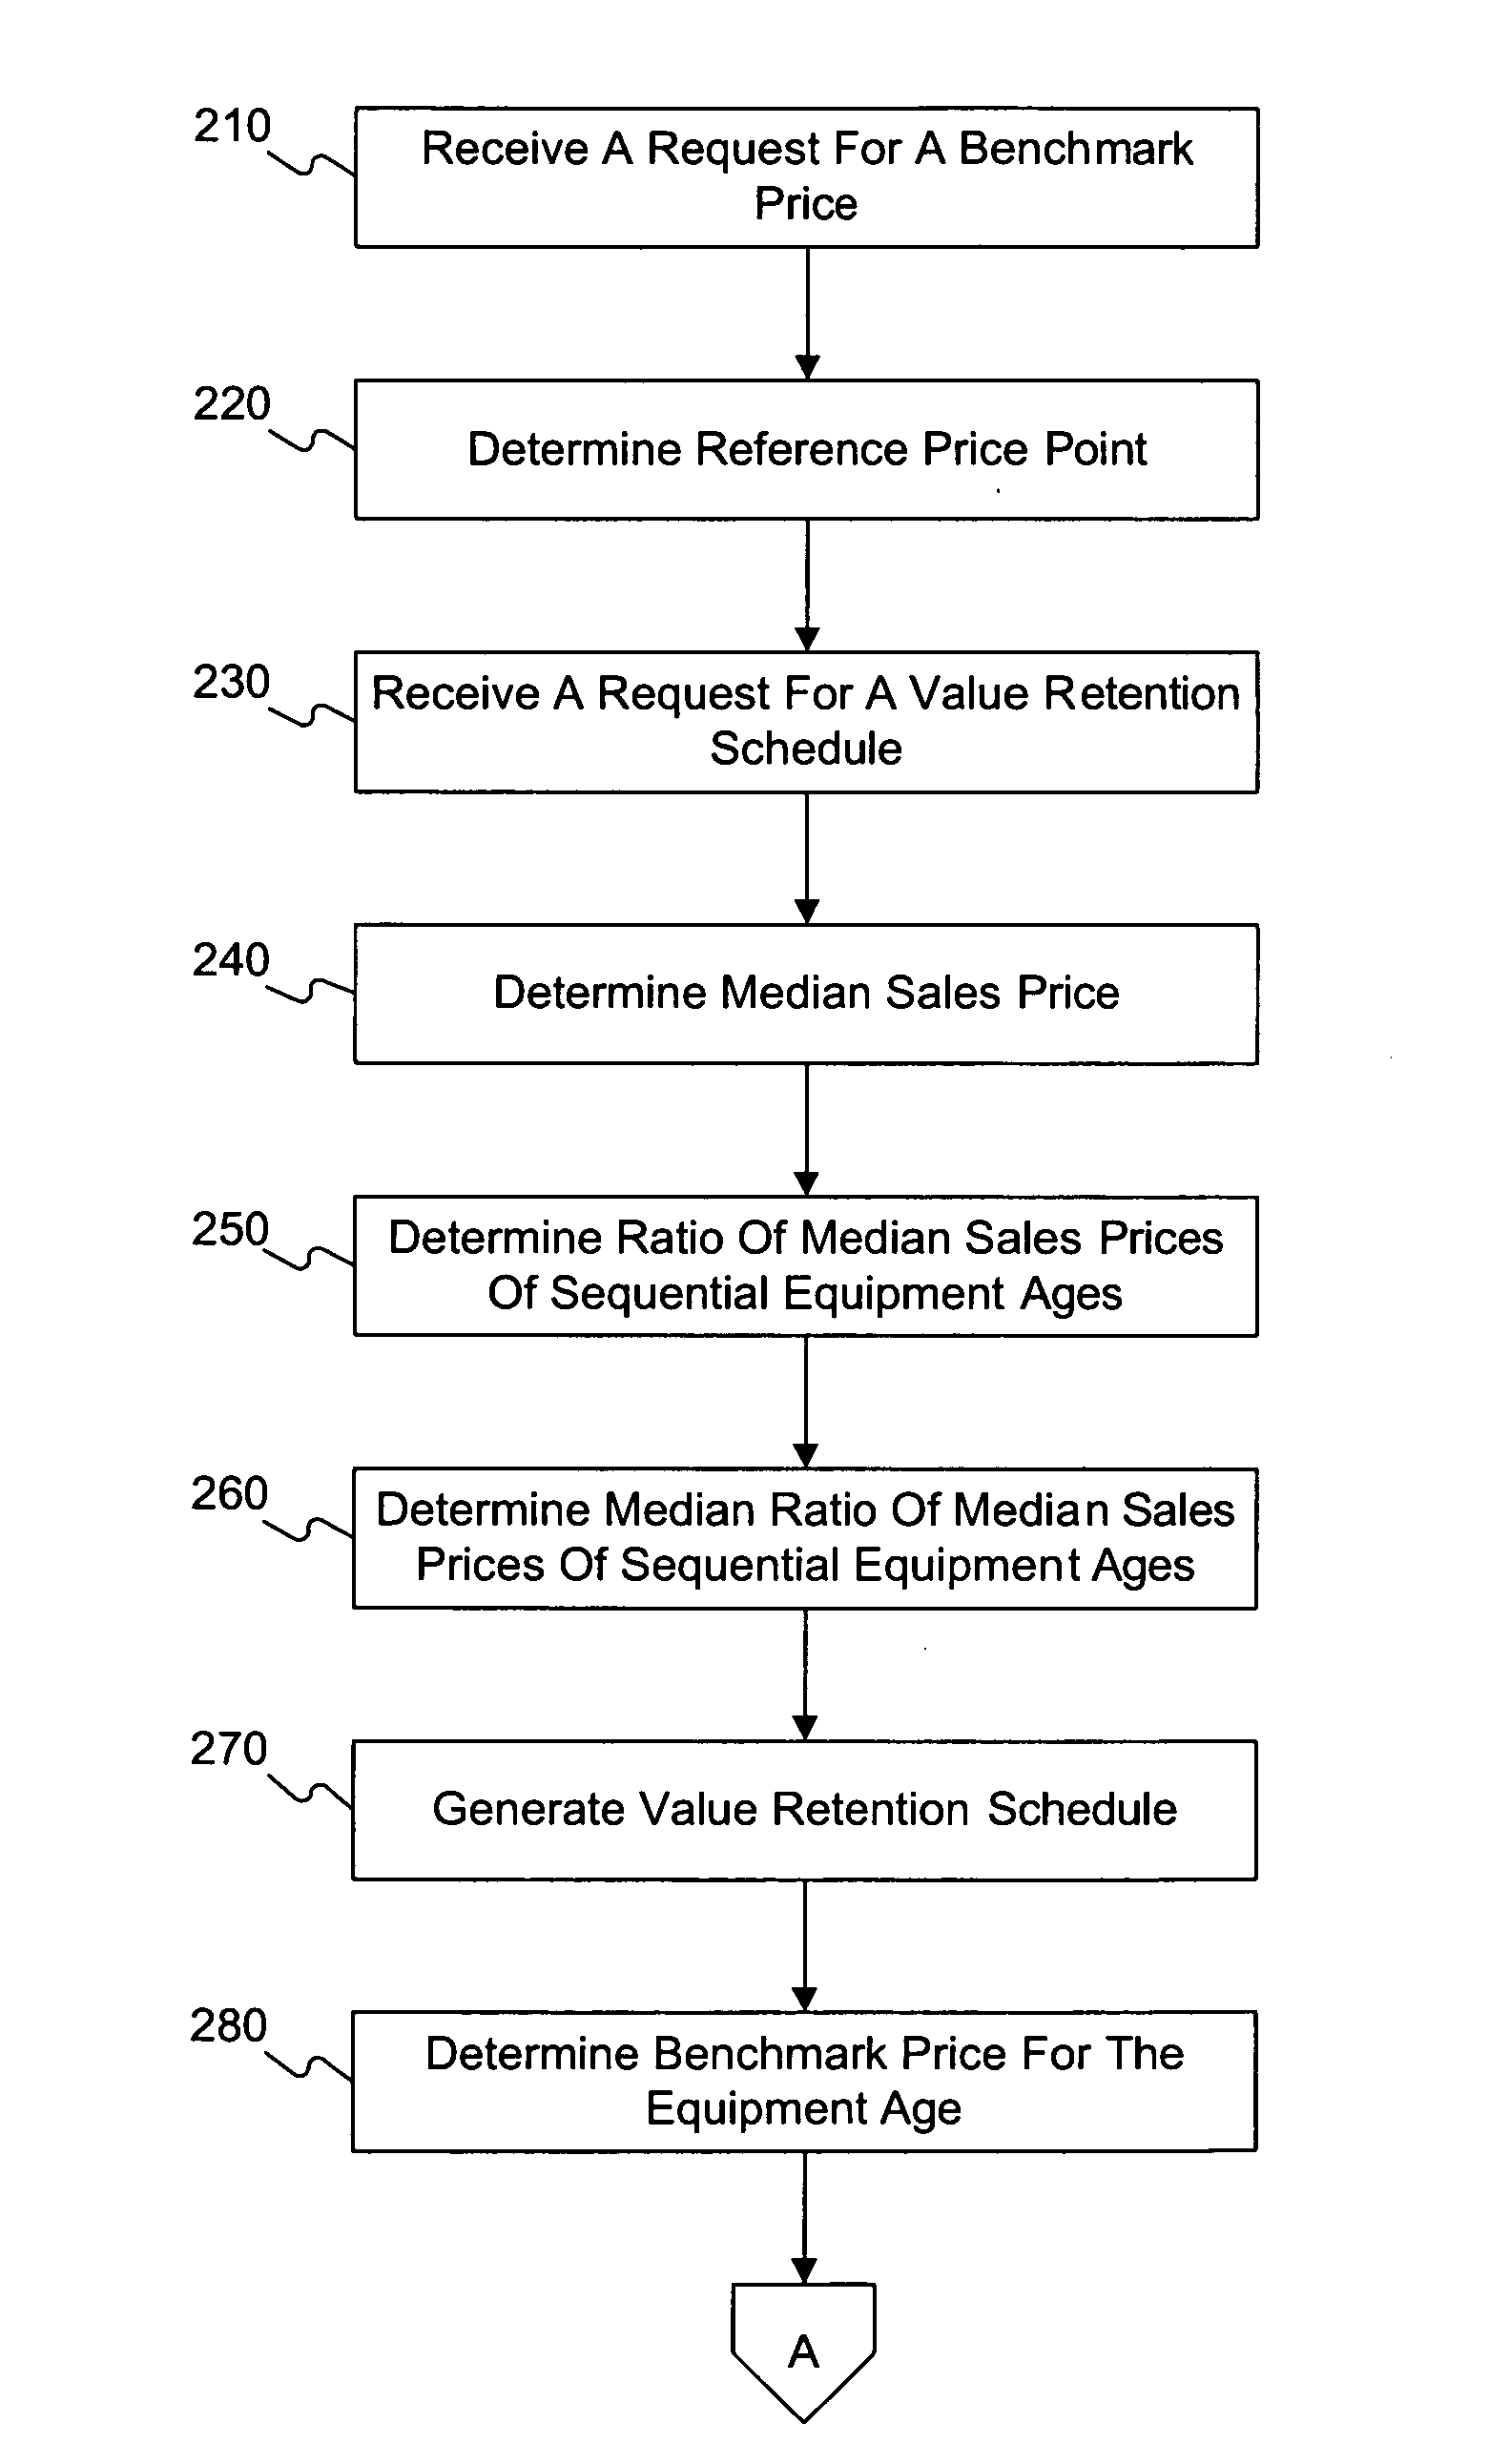 Systems and methods for determining a benchmark price